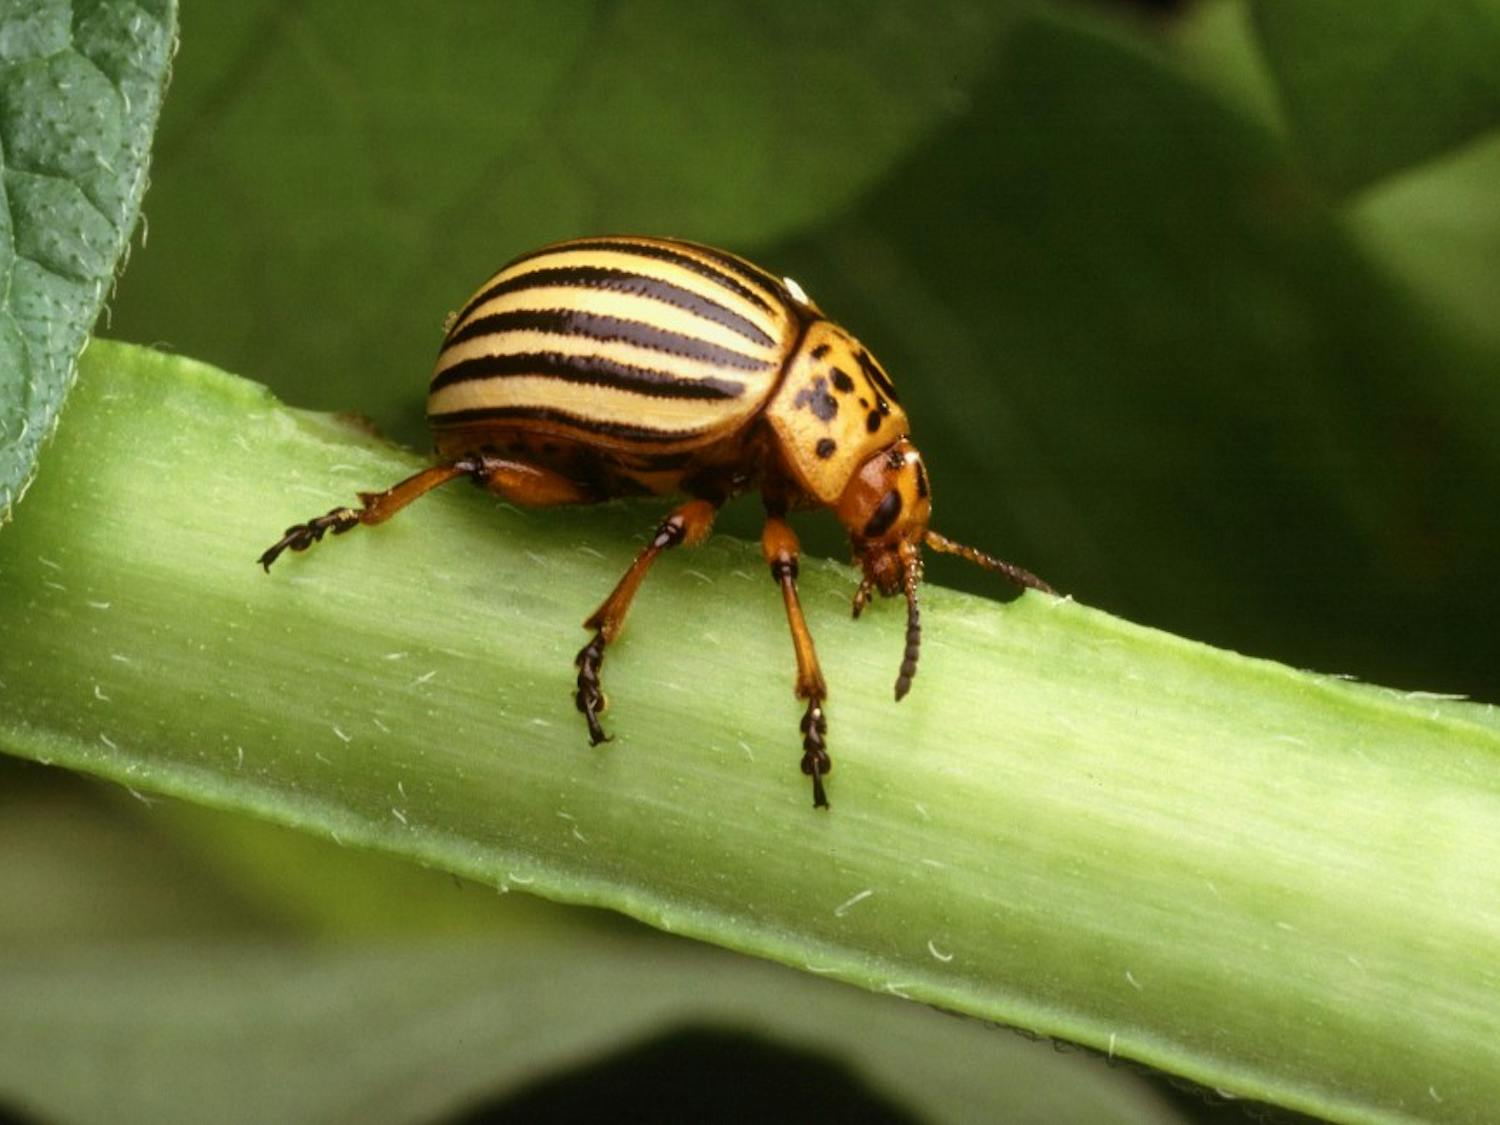 The Colorado potato beetle is notorious for its ability to rapidly adapt to pest control methods.